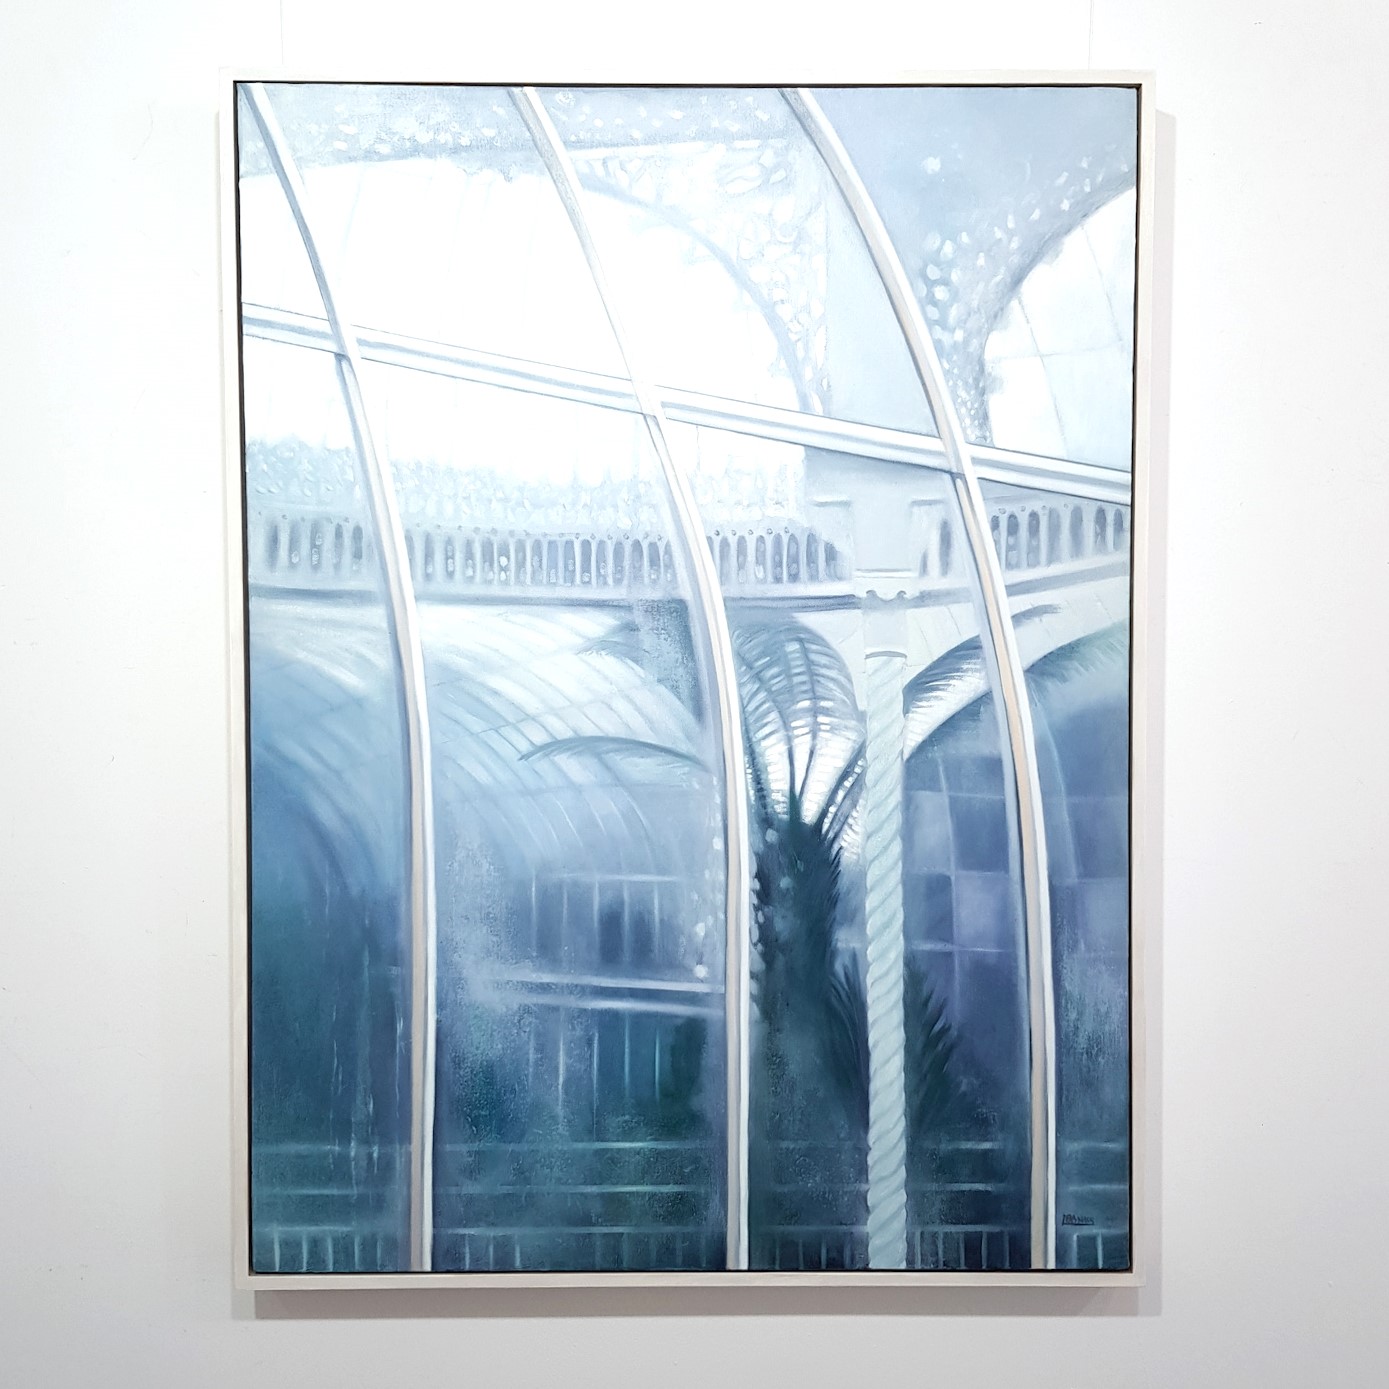 'Kibble Palace, Looking Inwards, Misty Morning  ' by artist Lesley Banks